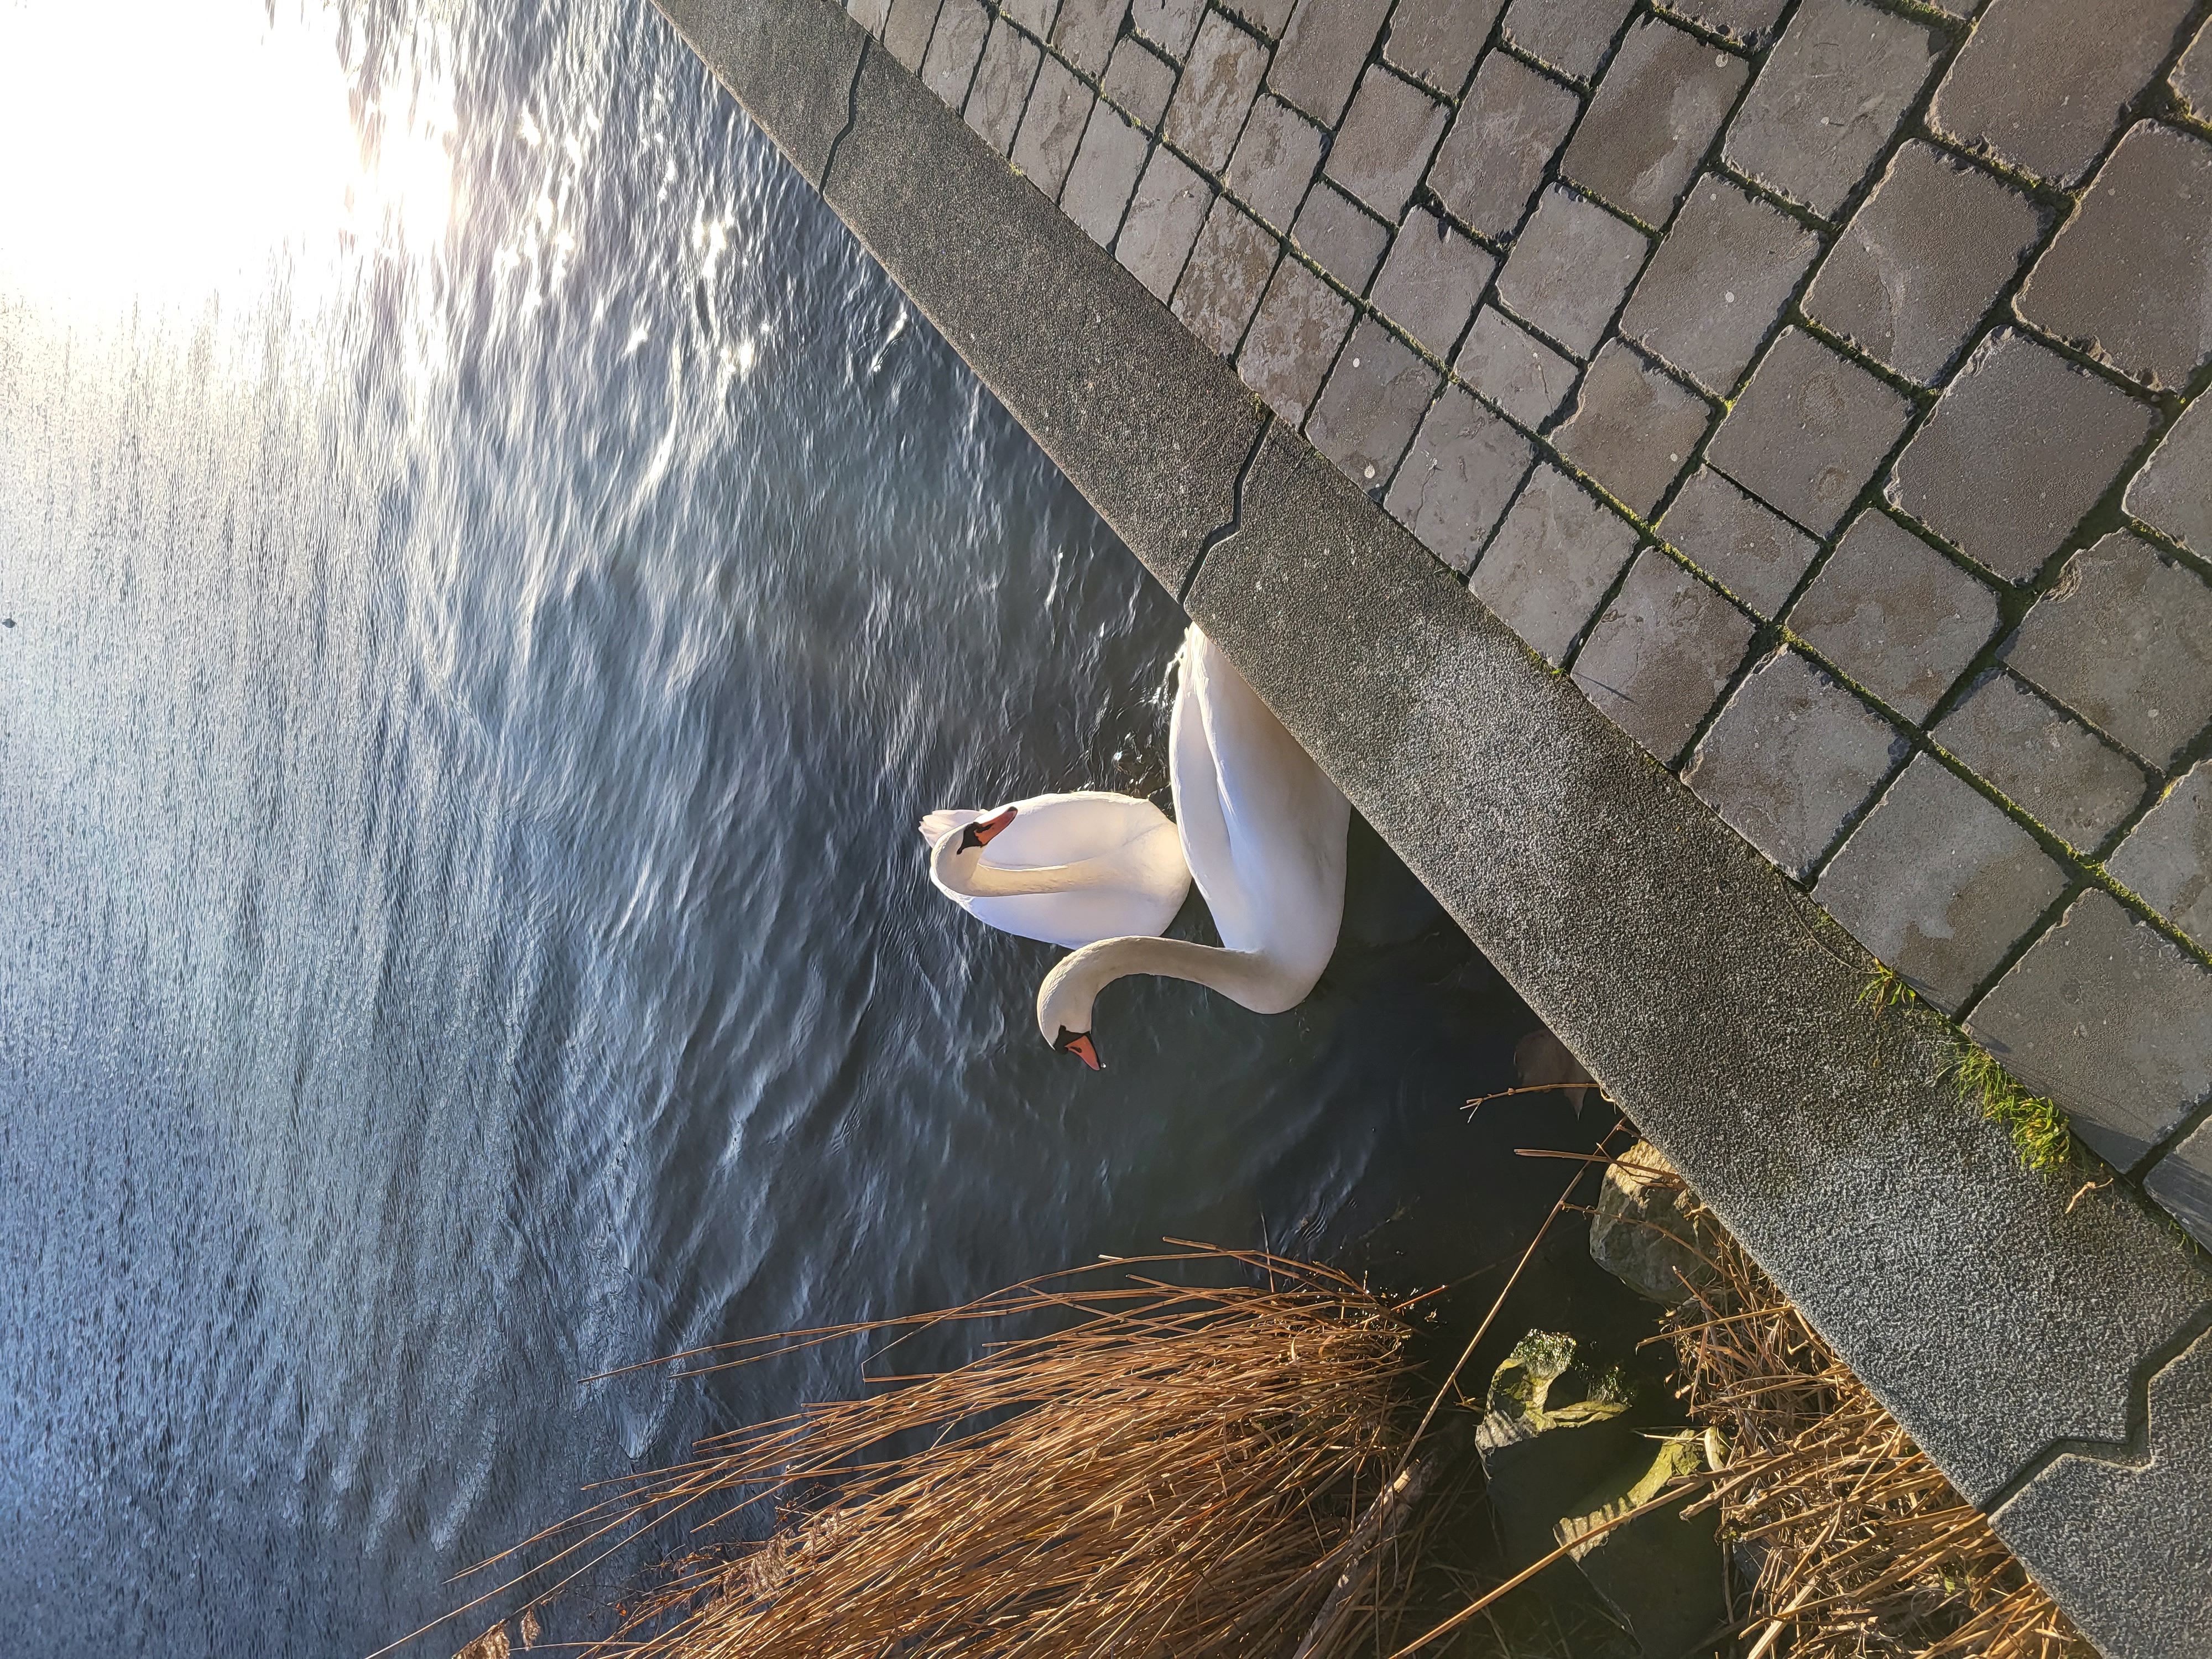 a photograph of a pair of swans in a river.